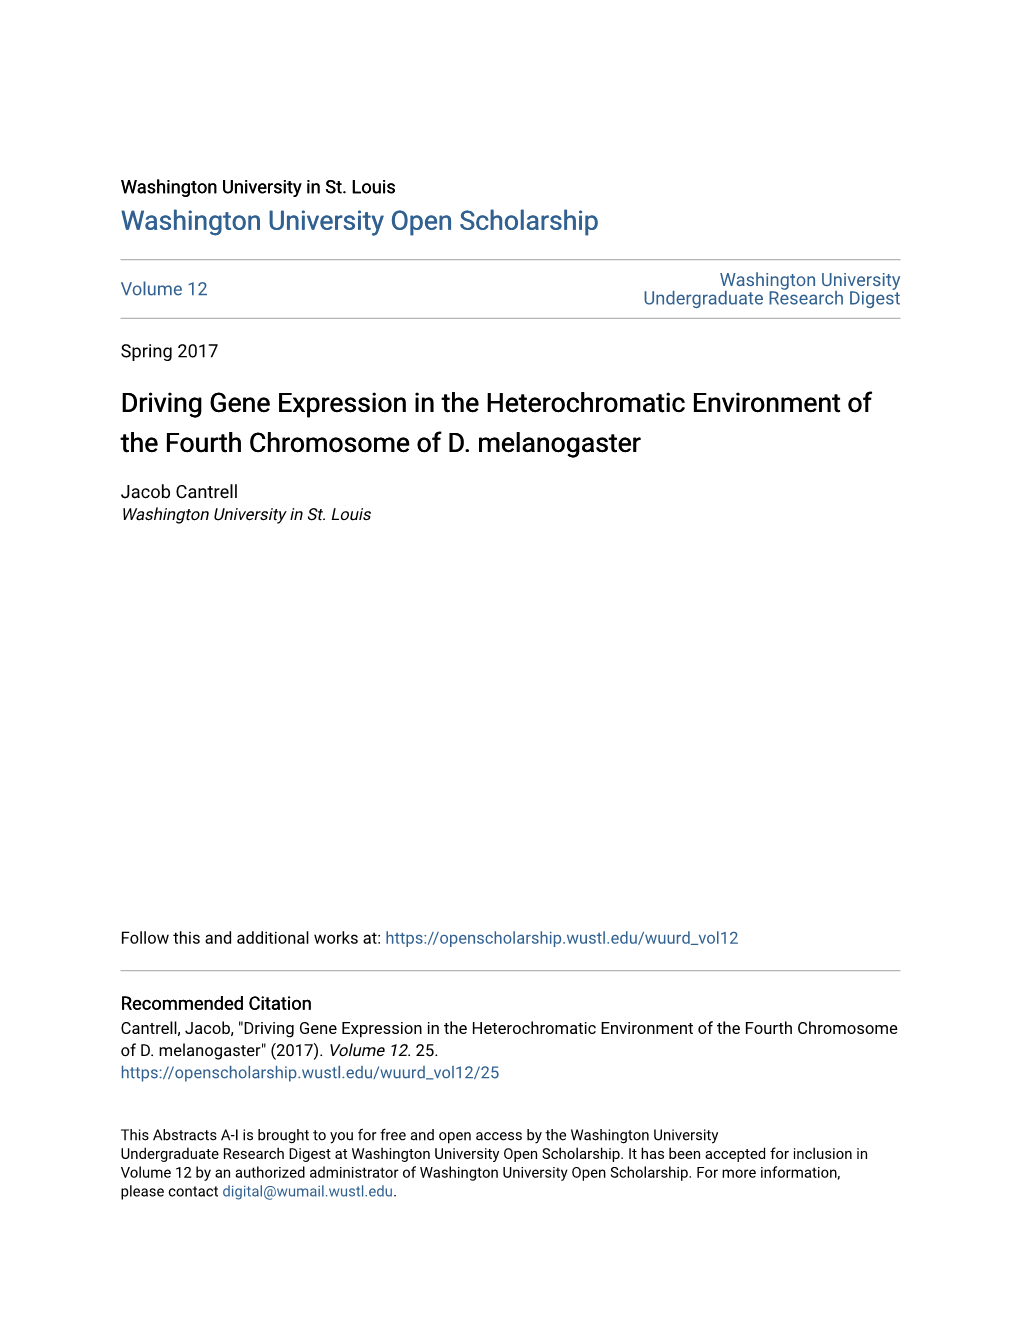 Driving Gene Expression in the Heterochromatic Environment of the Fourth Chromosome of D